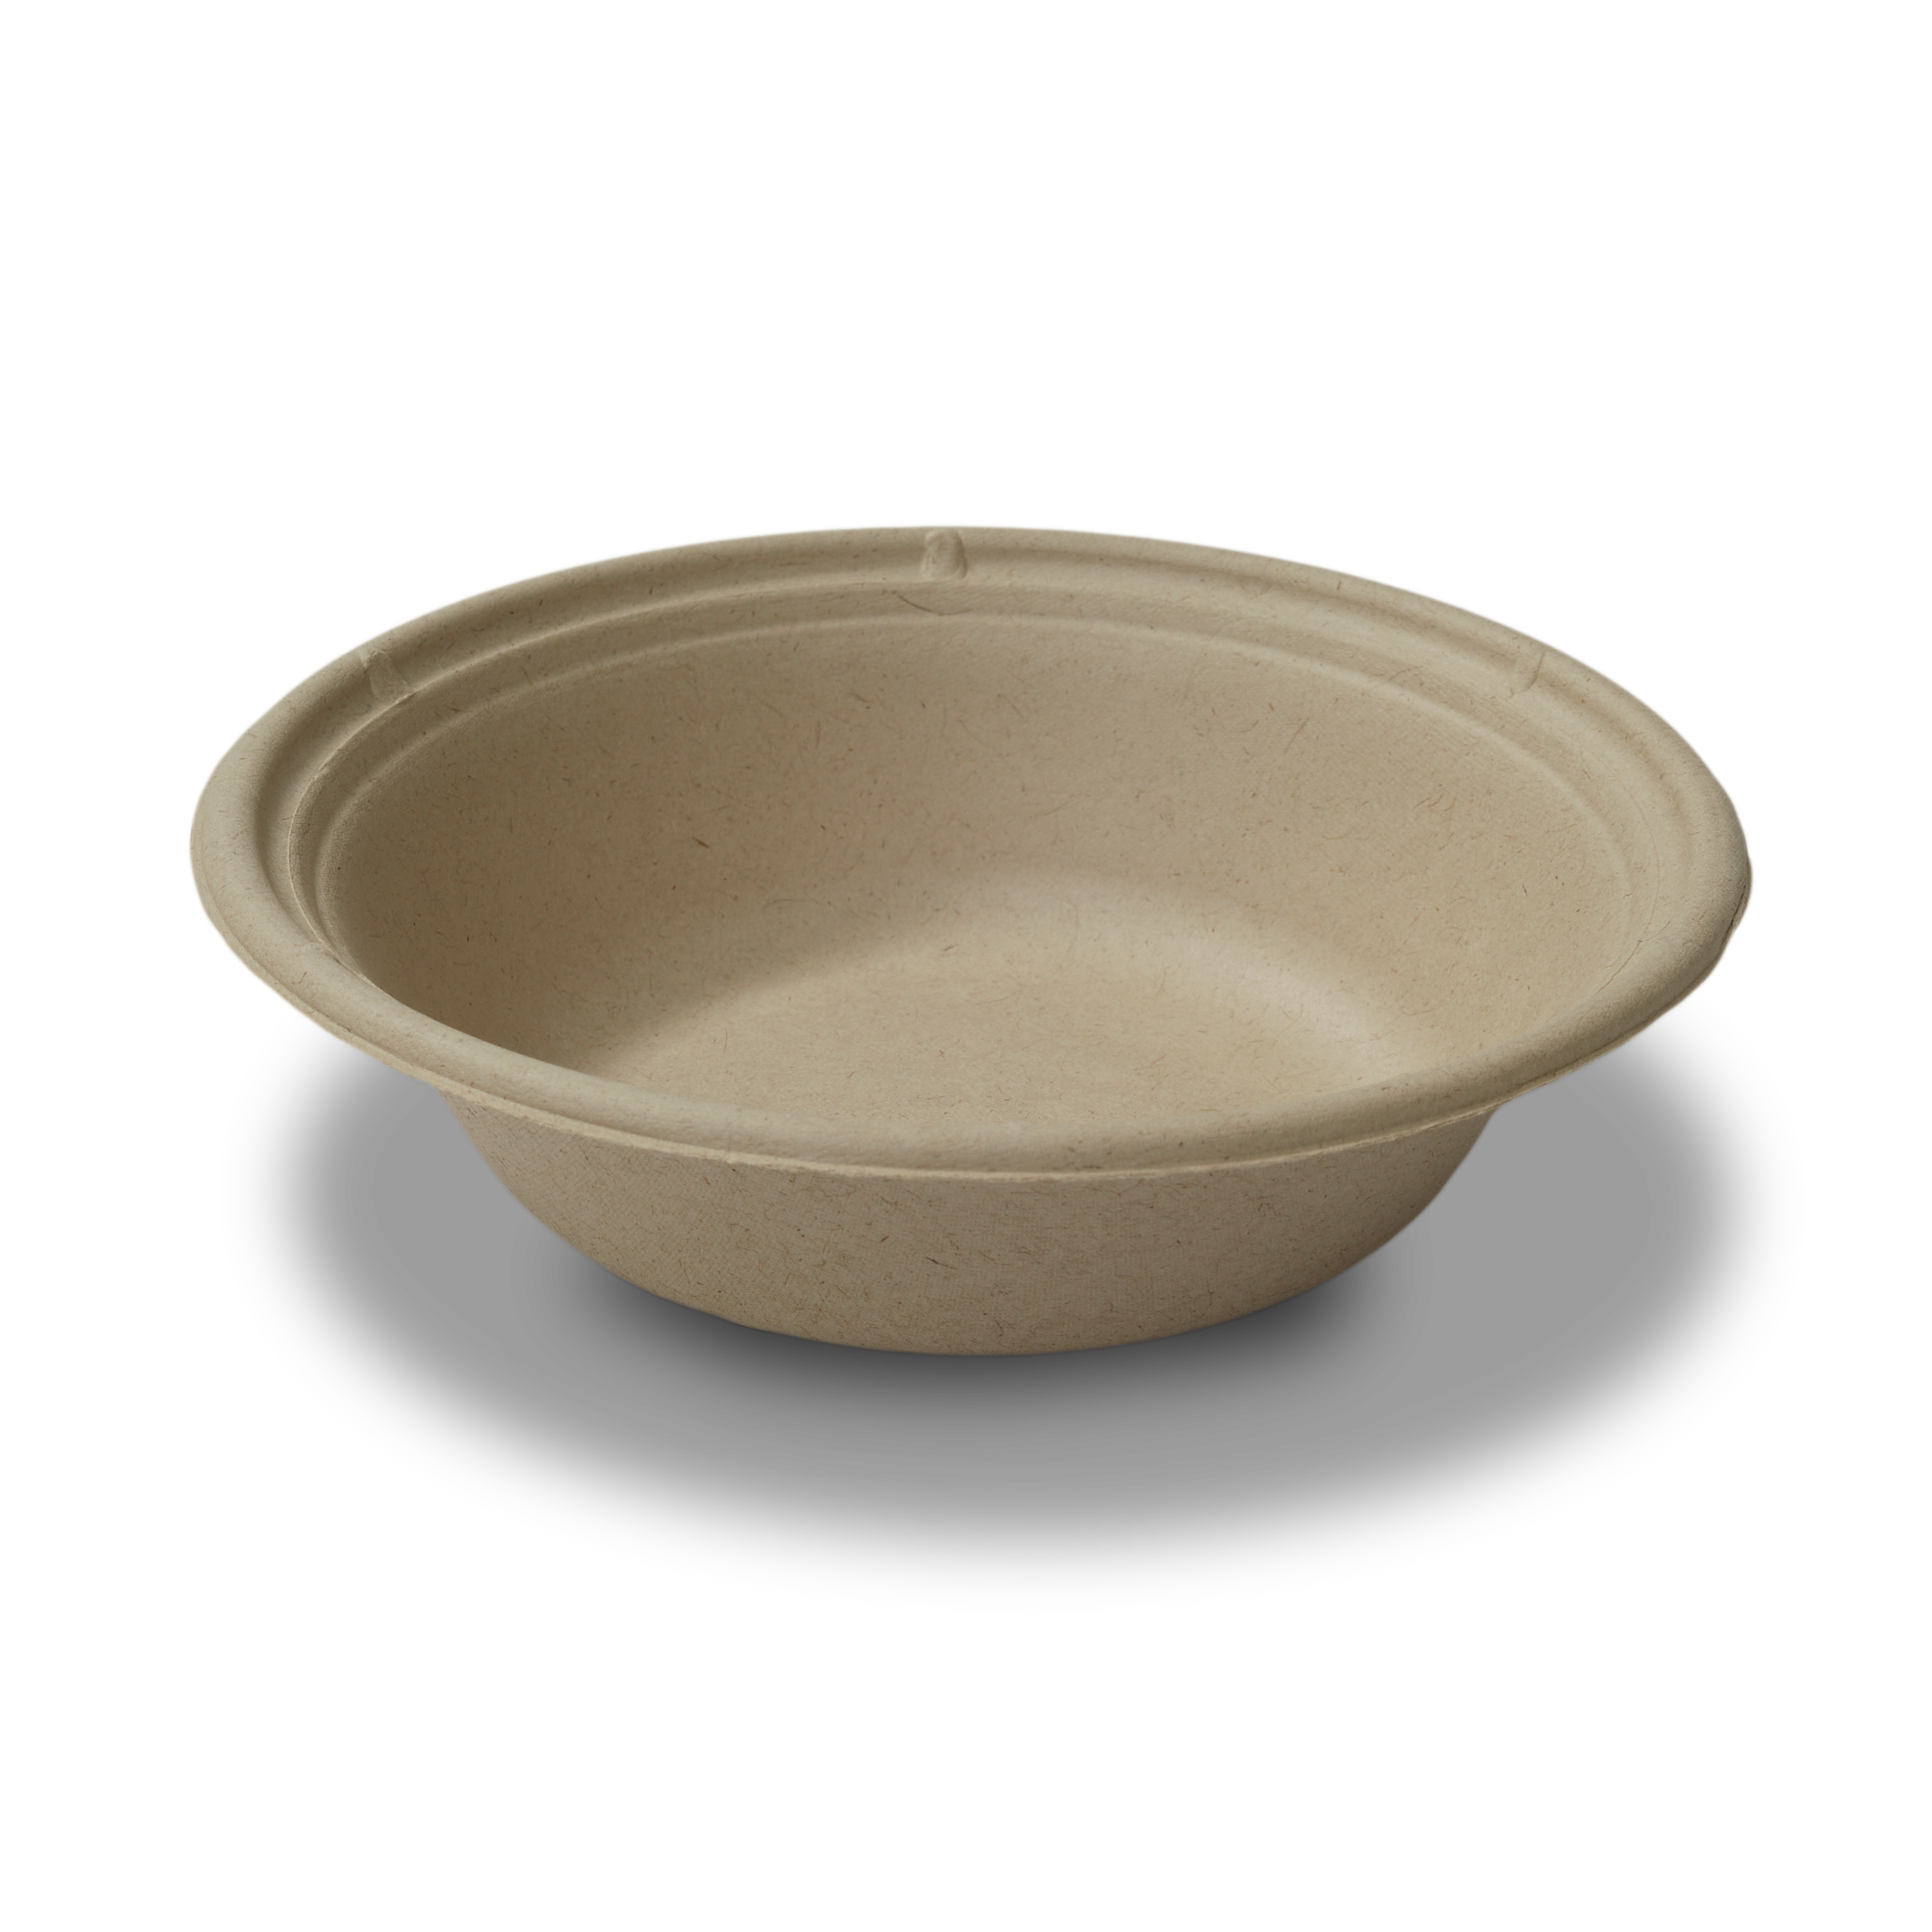 https://cdn.shopify.com/s/files/1/0612/3690/4162/products/tel-433469_tellus-round-compostable-bowl-24-biodegradable.png?v=1659069802